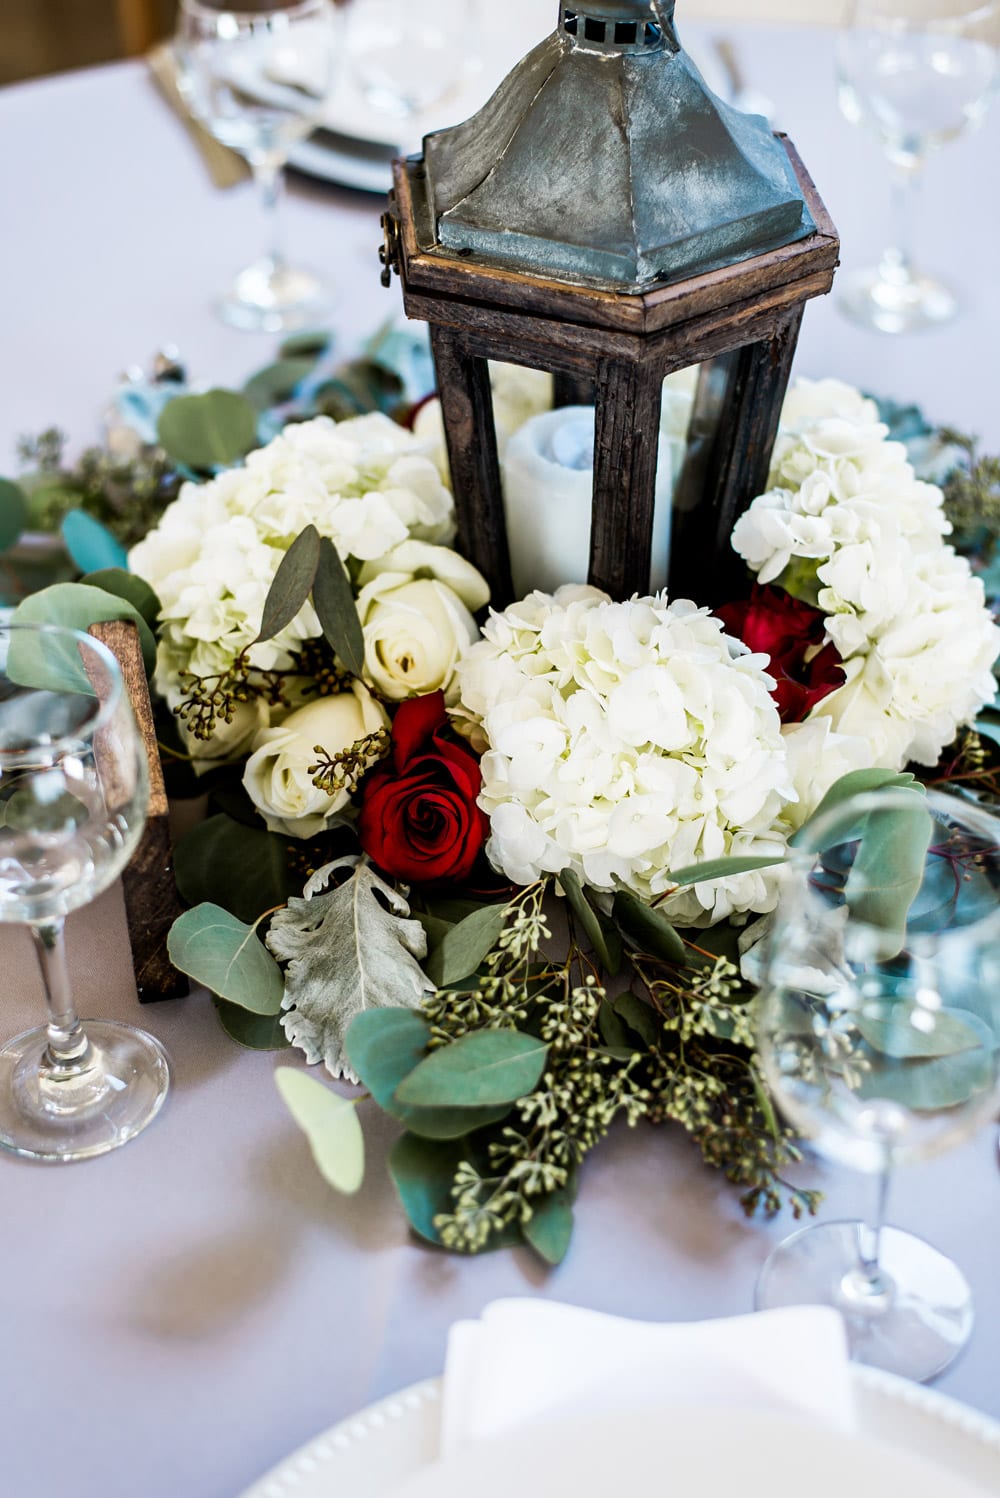 Lantern and florals on dinner table